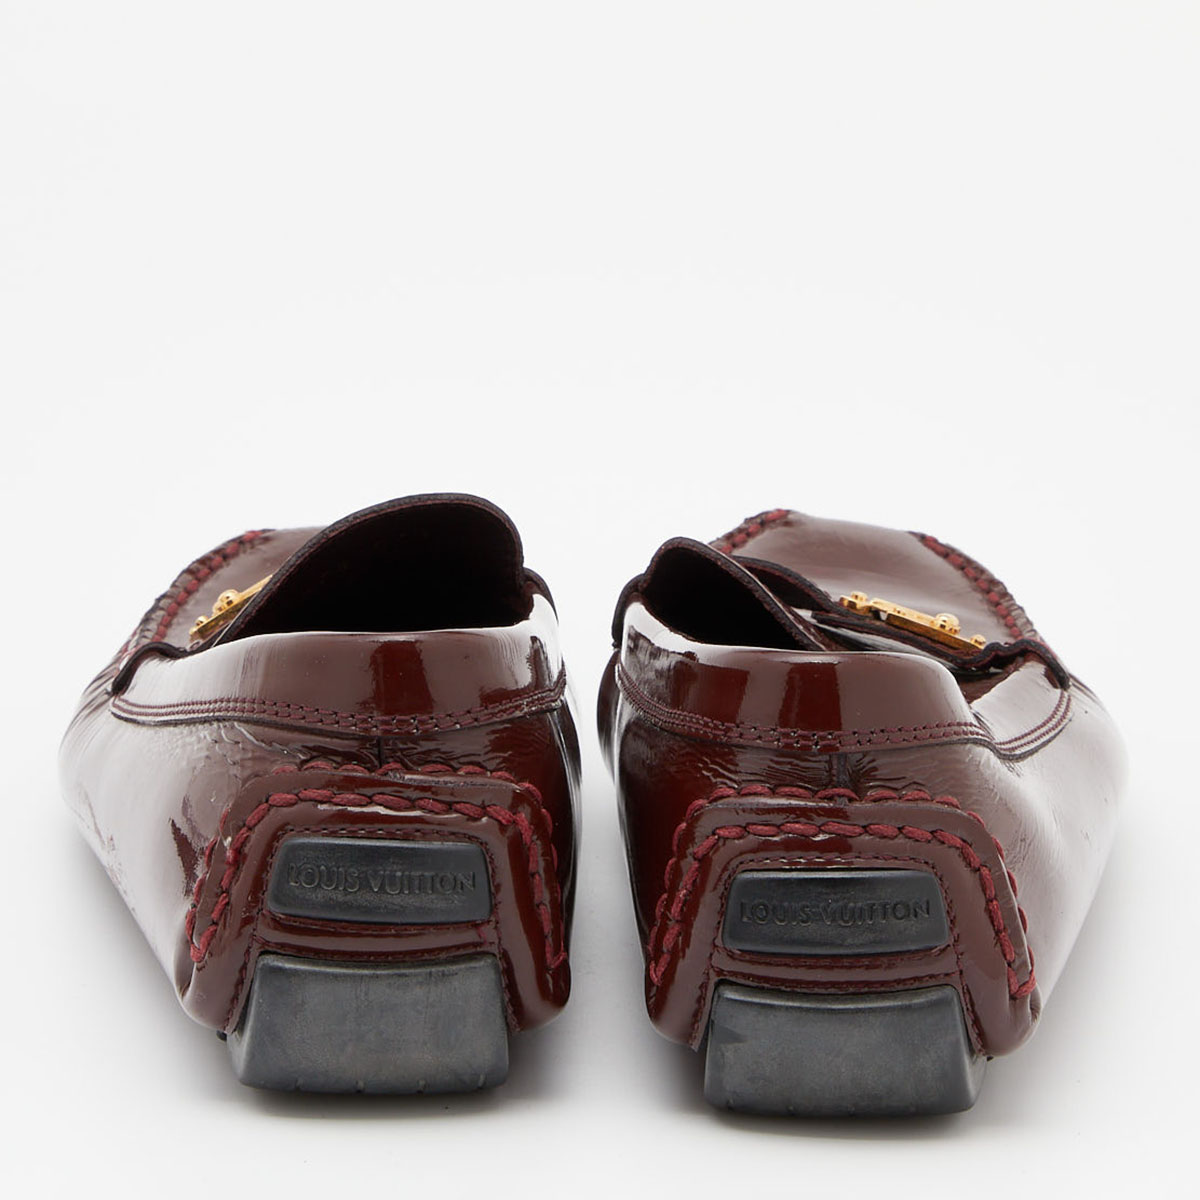 Louis Vuitton Burgundy Patent Leather Slip On Loafers Size 37.5